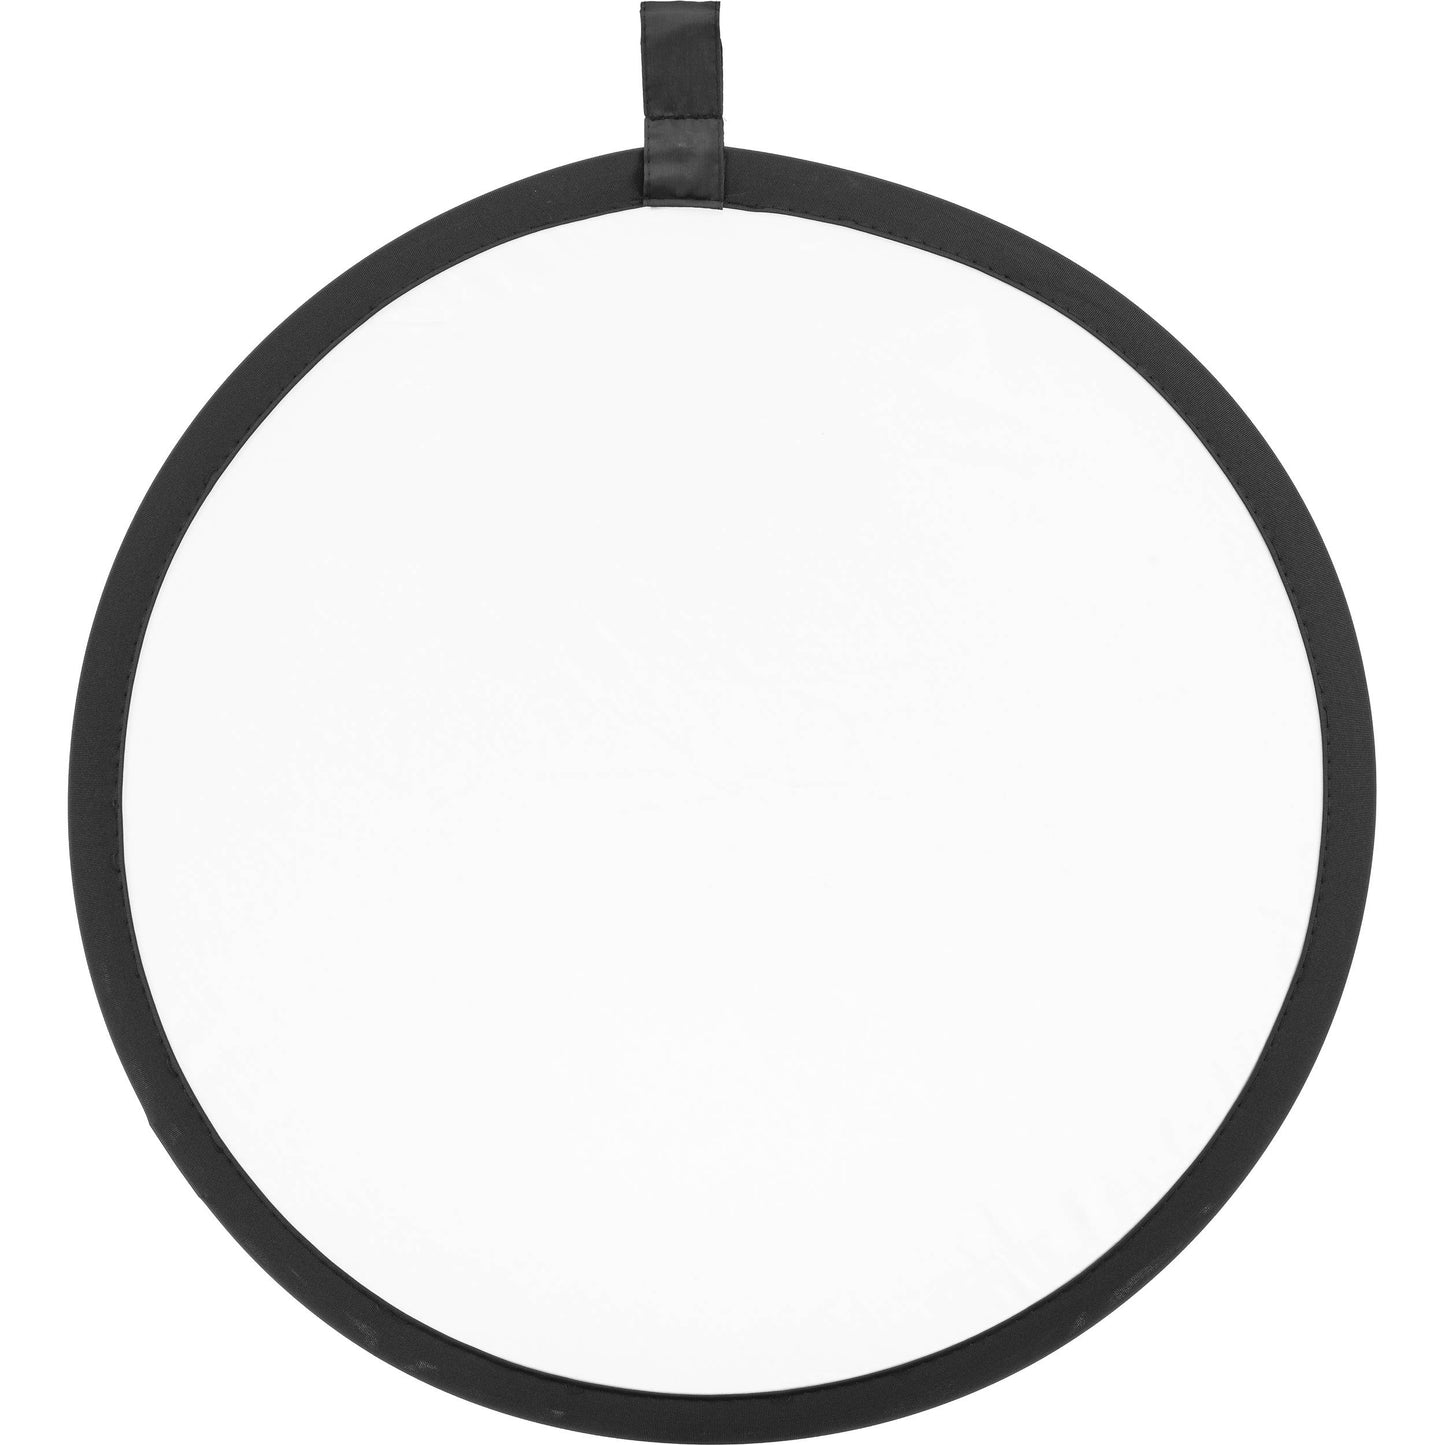 Godox RFT-02 80cm 2-in-1 Reflector Disc (White and Silver) Collapsible with Storage Bag for Studio Lighting Photography